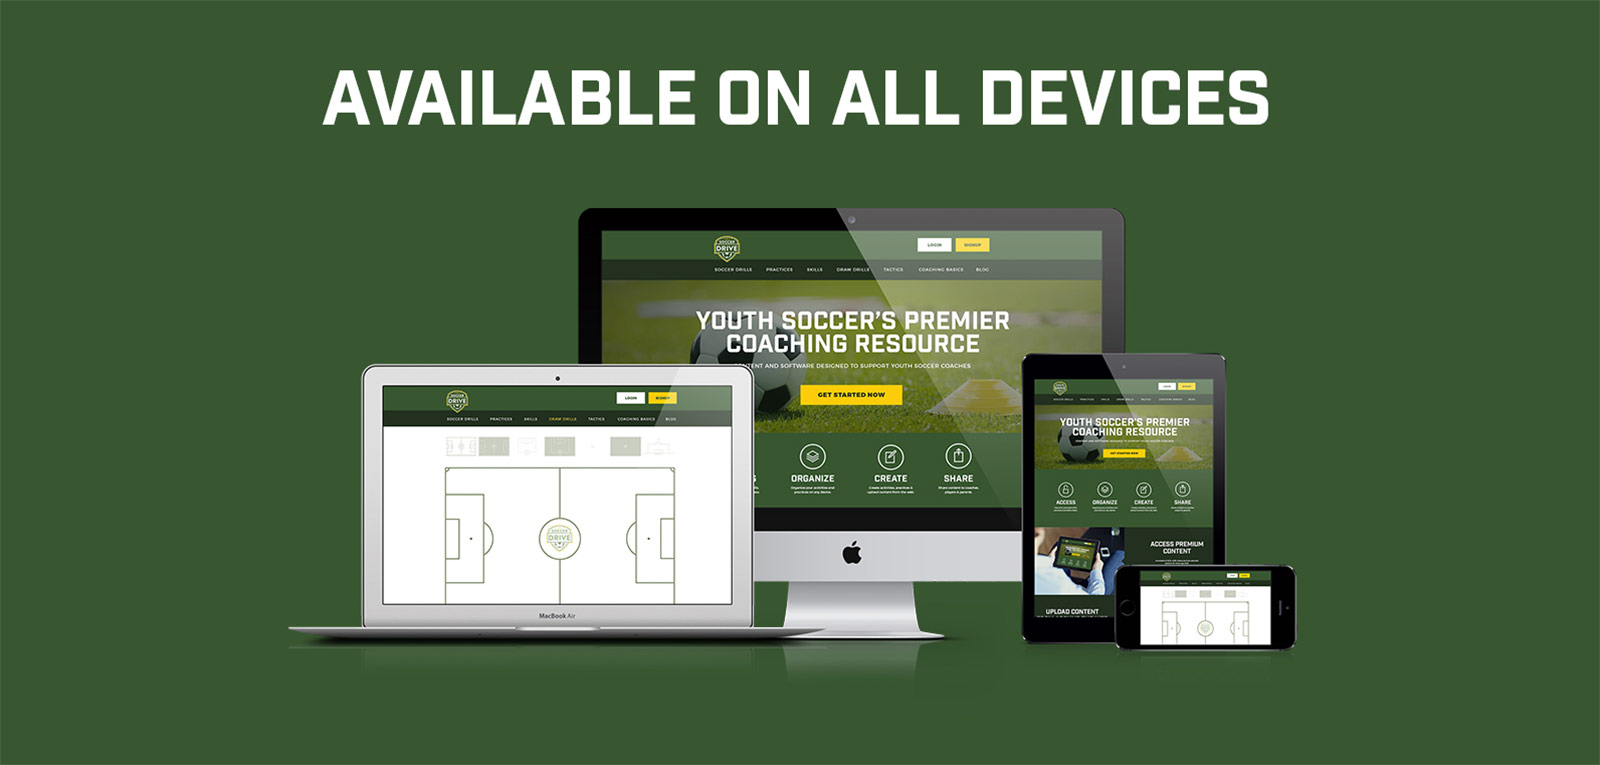 shows mobile device, tablet, and desktop displaying soccerdrive.com to show that it is accessible on all devices